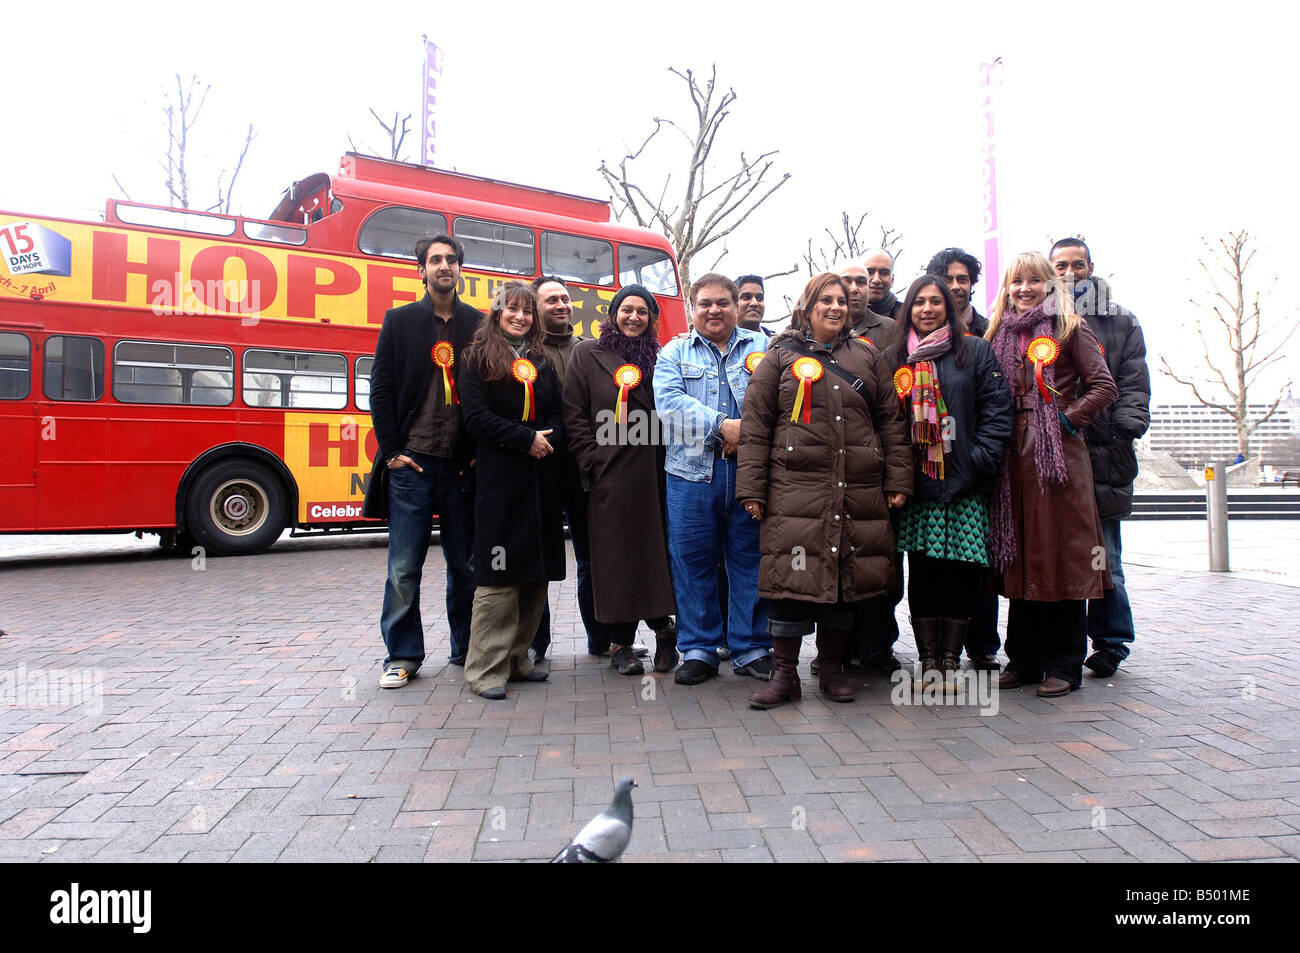 The Daily Mirror s Hope Not Hate bus tour started in London today Our bus visited the cast of The Bill on set and the cast of Rafta Rafta at the National Theatre on the South Bank 23rd March 2007 Stock Photo